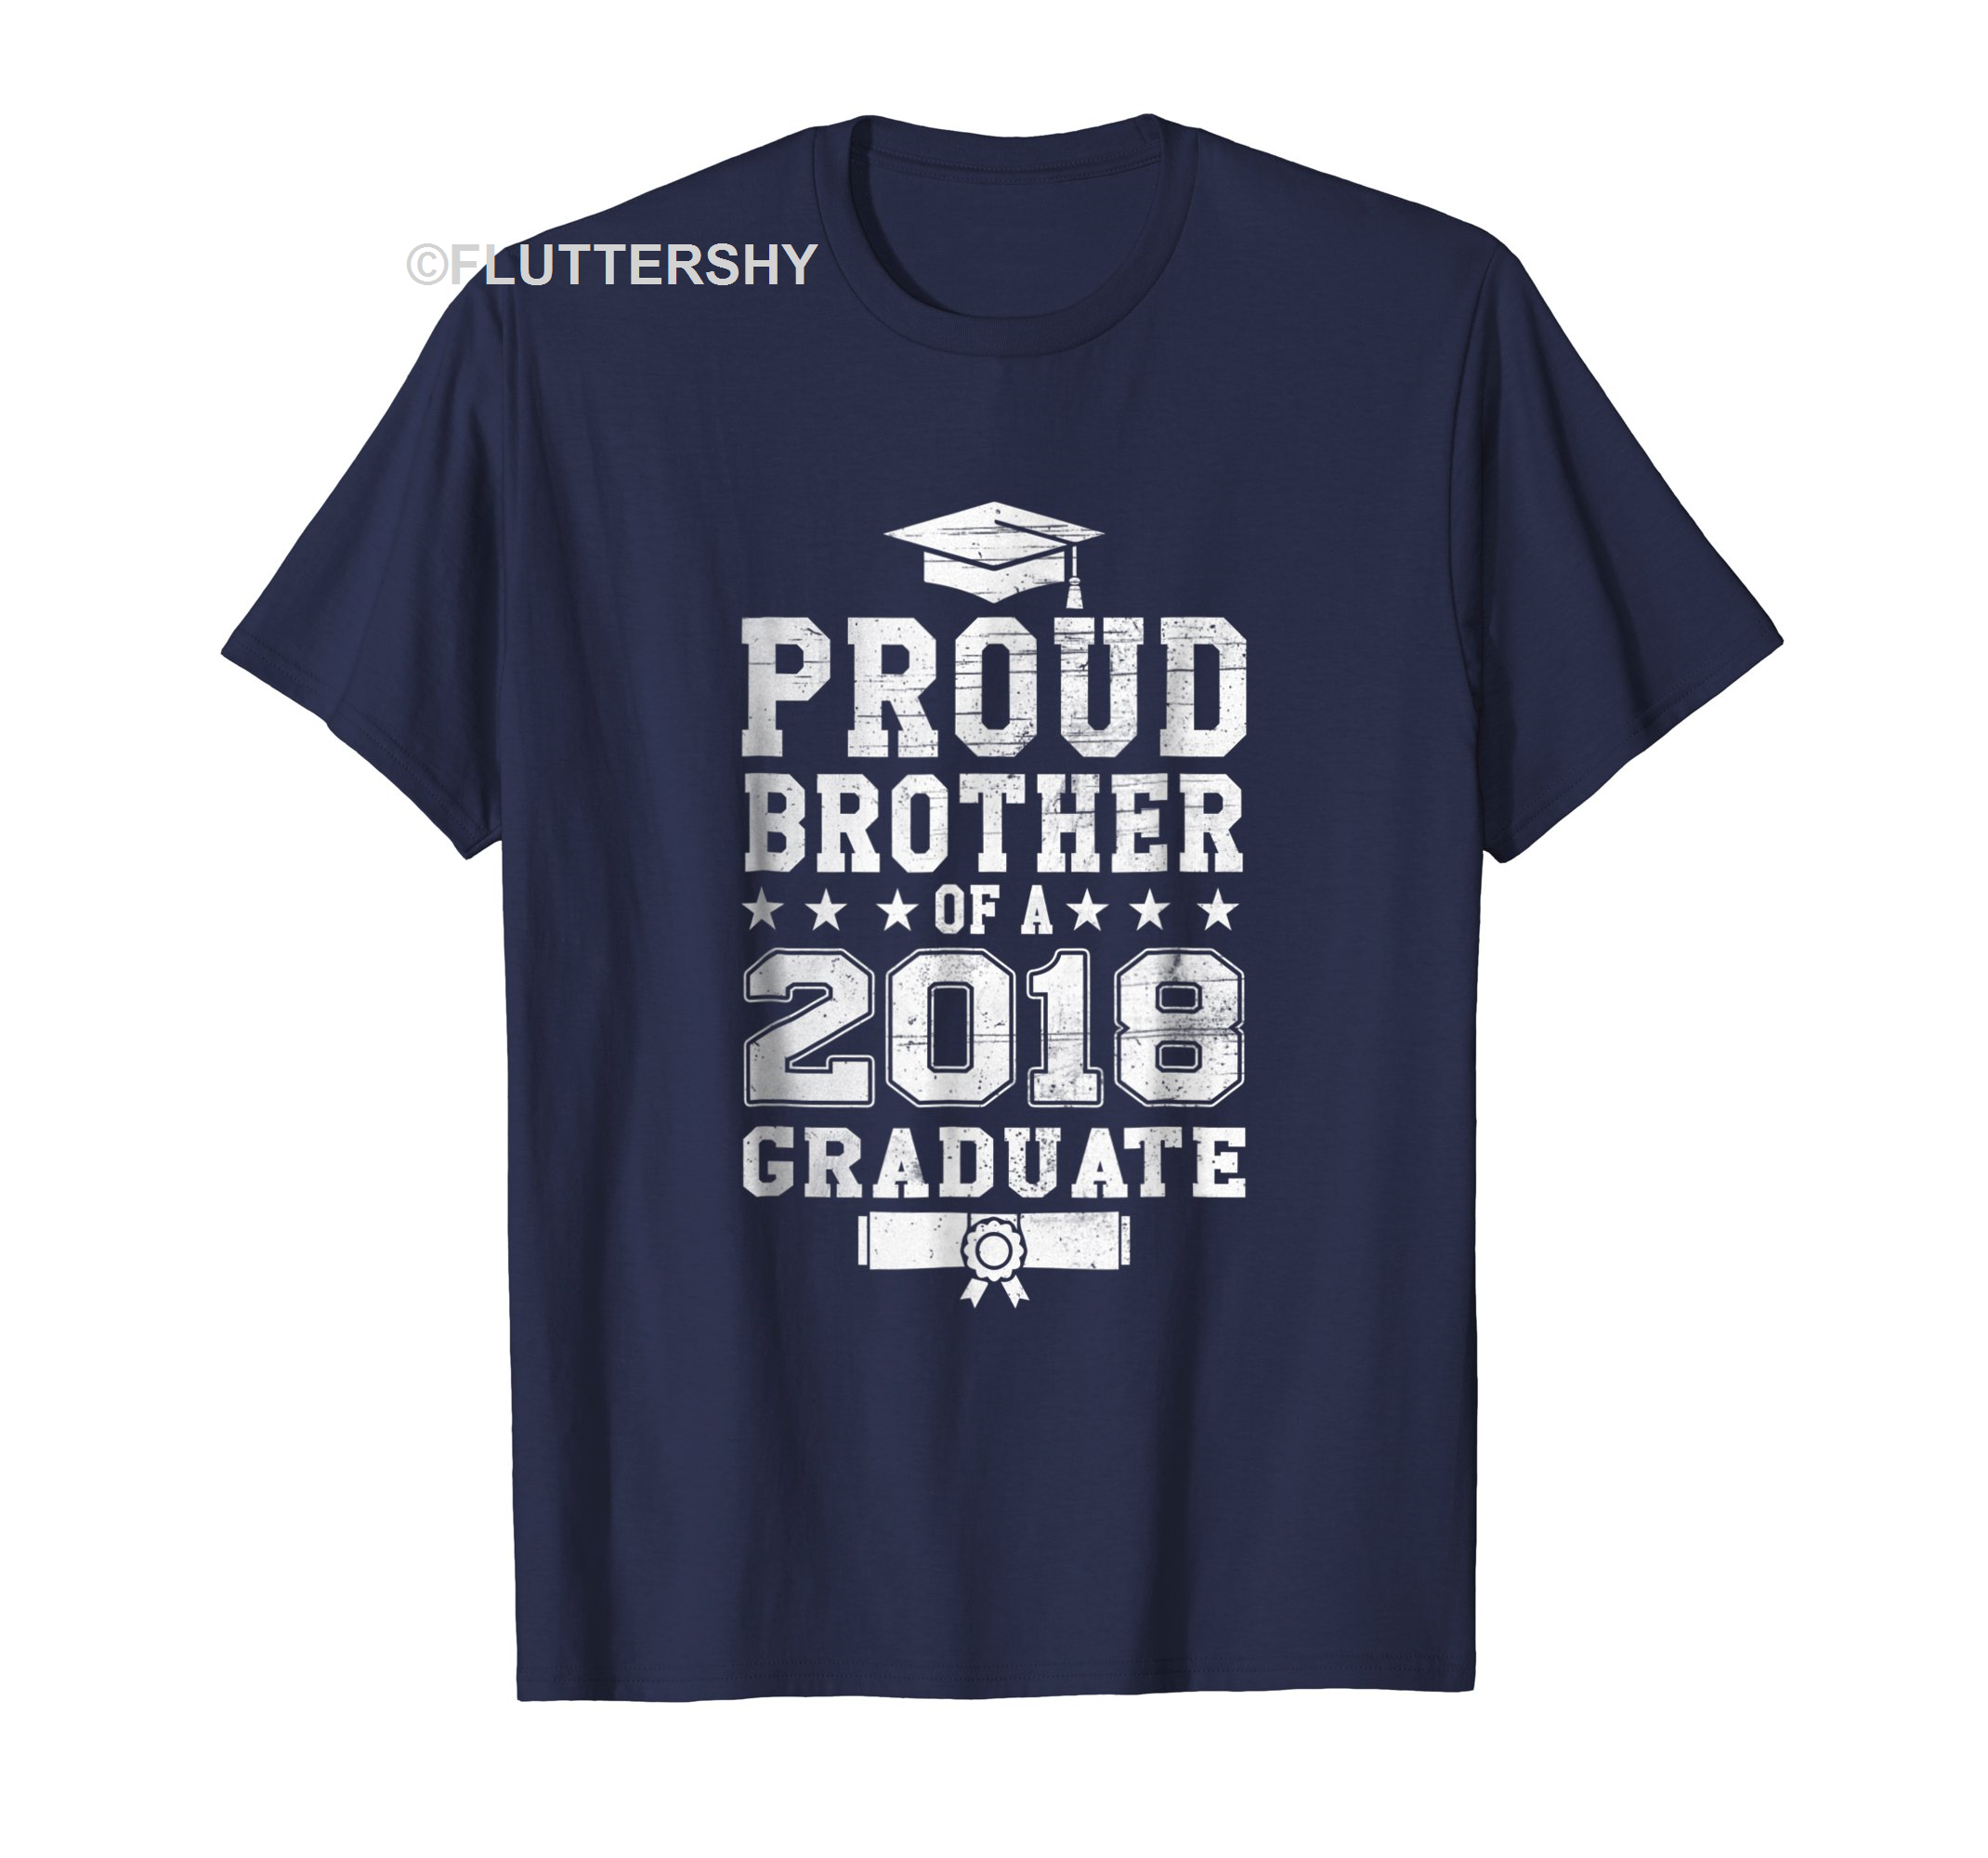 Outstanding Cover Your Body With Amazing Proud Brother Of A 2018 Graduate Graduating Tshir